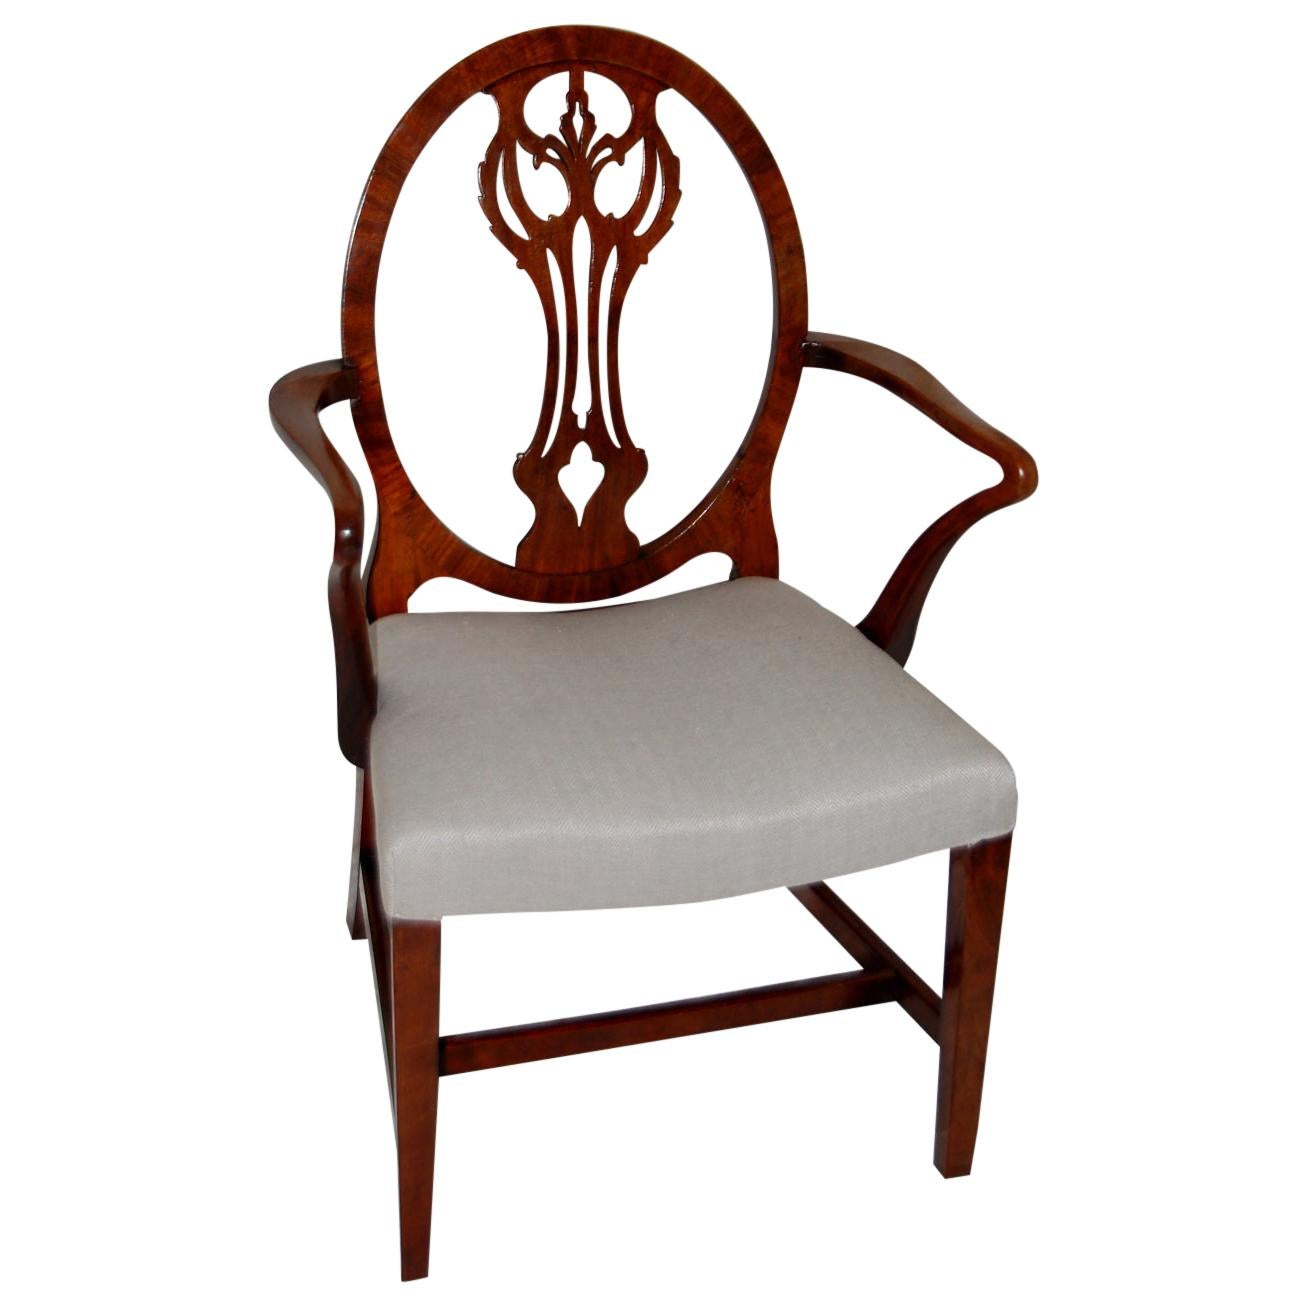 English Georgian Period Hepplewhite Armchair with Oval Back and Carved Splat